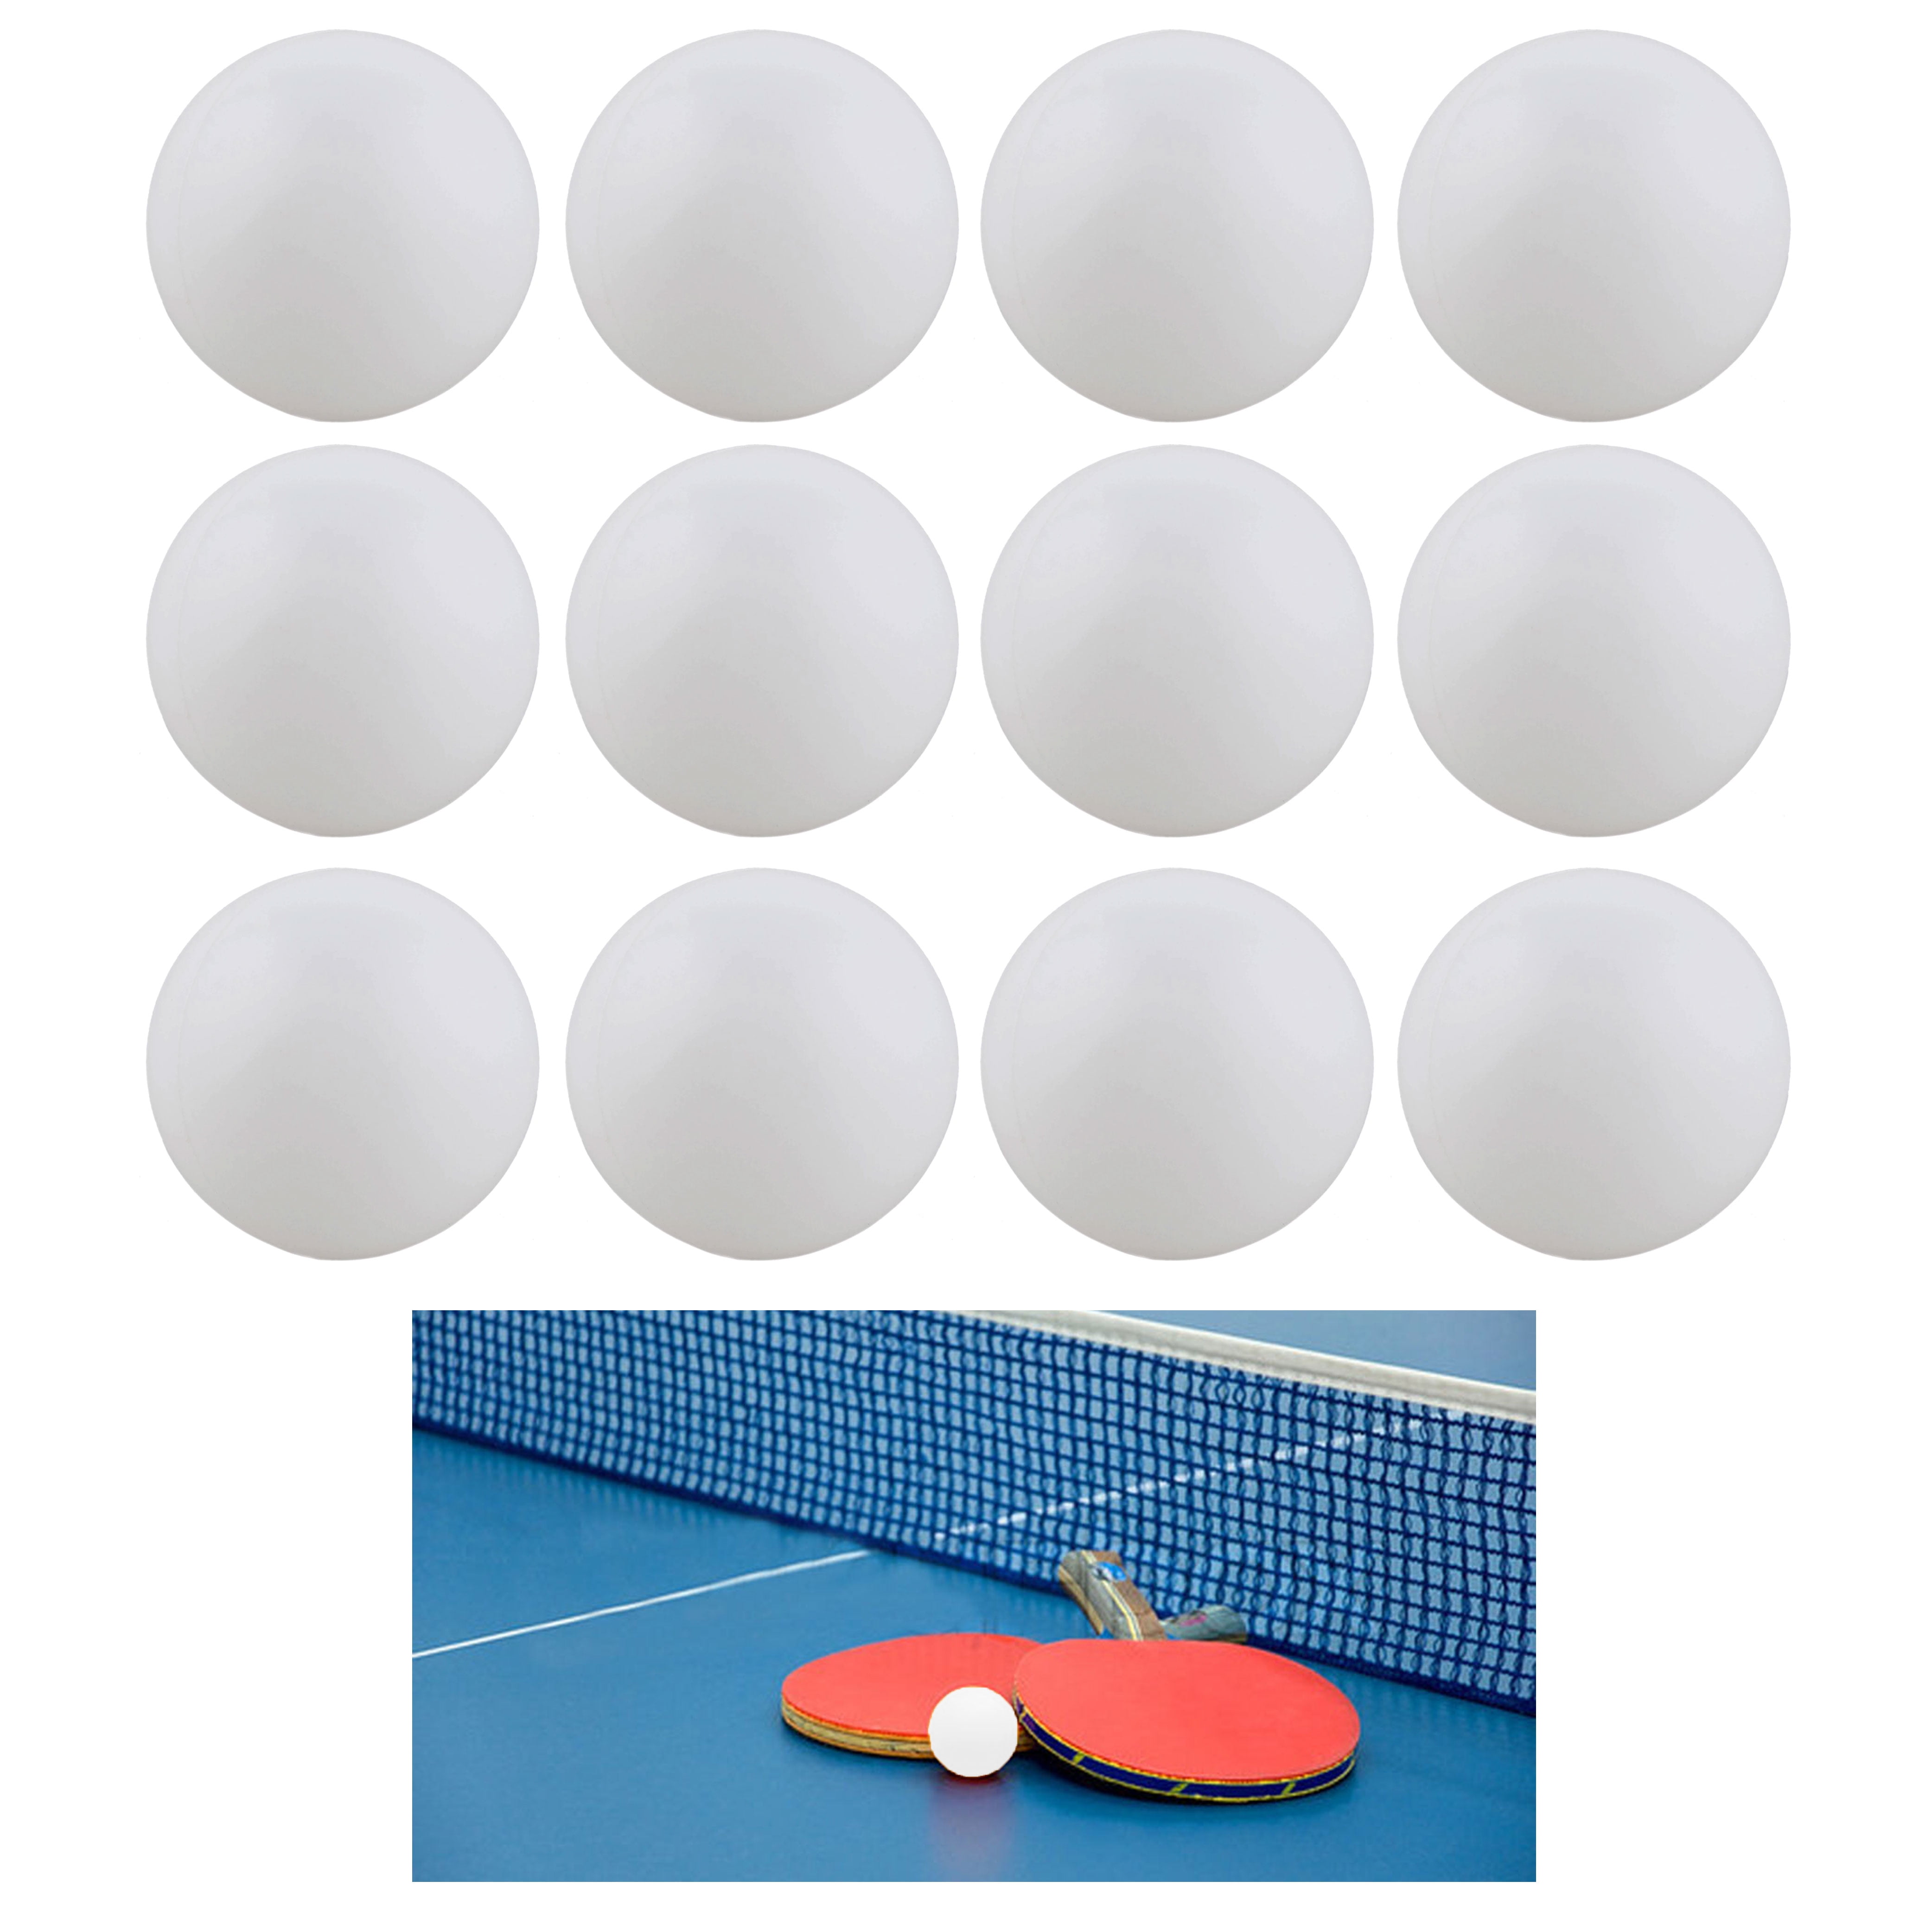 Carnival Games 38mm 144 Practice Ping Pong Balls Beer Pong Table Tennis 